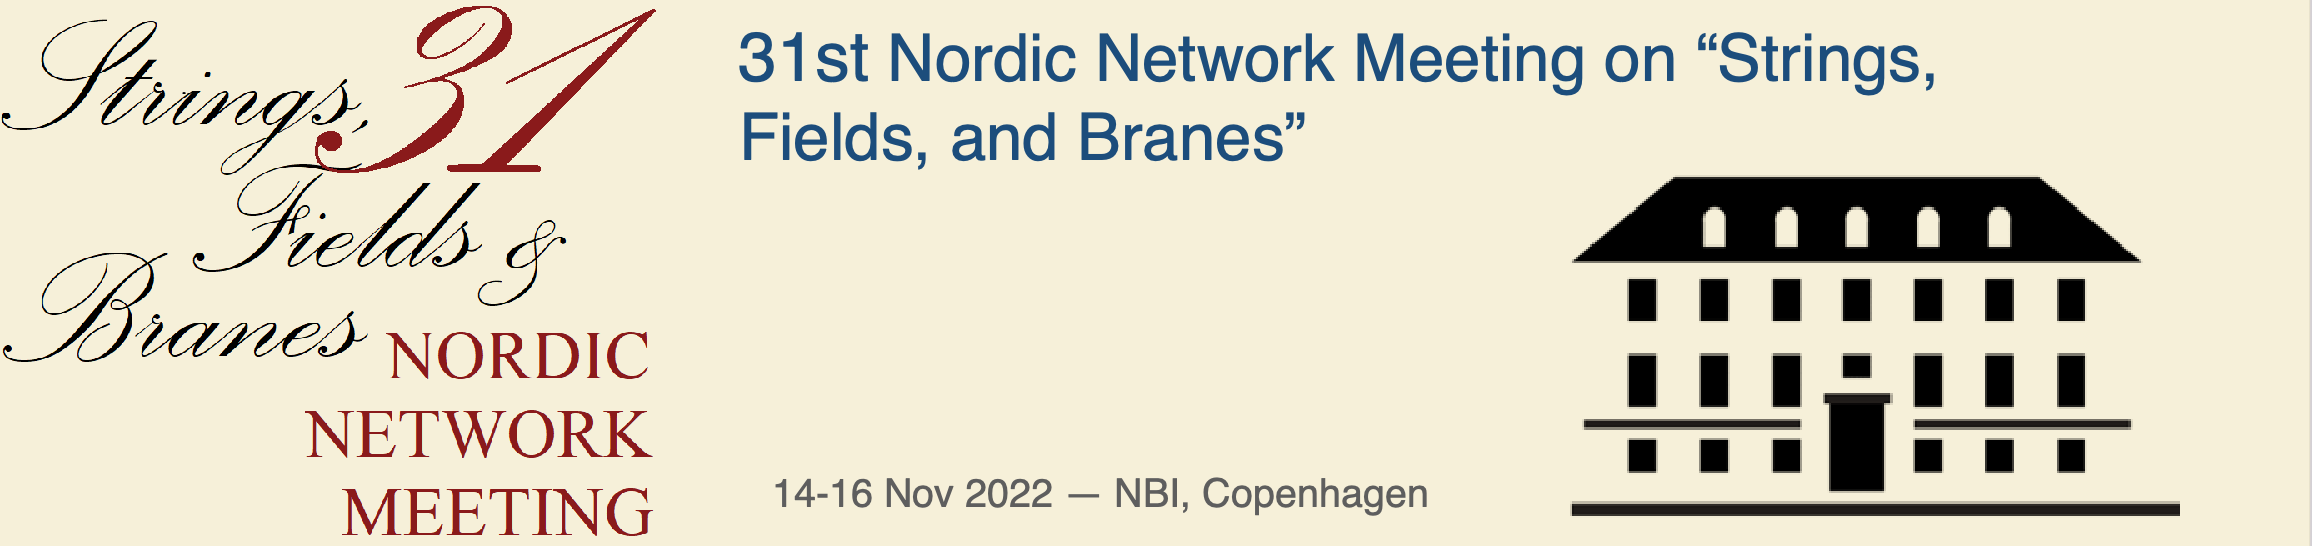 The 31st Nordic Network Meeting on "Strings, Fields, and Branes"